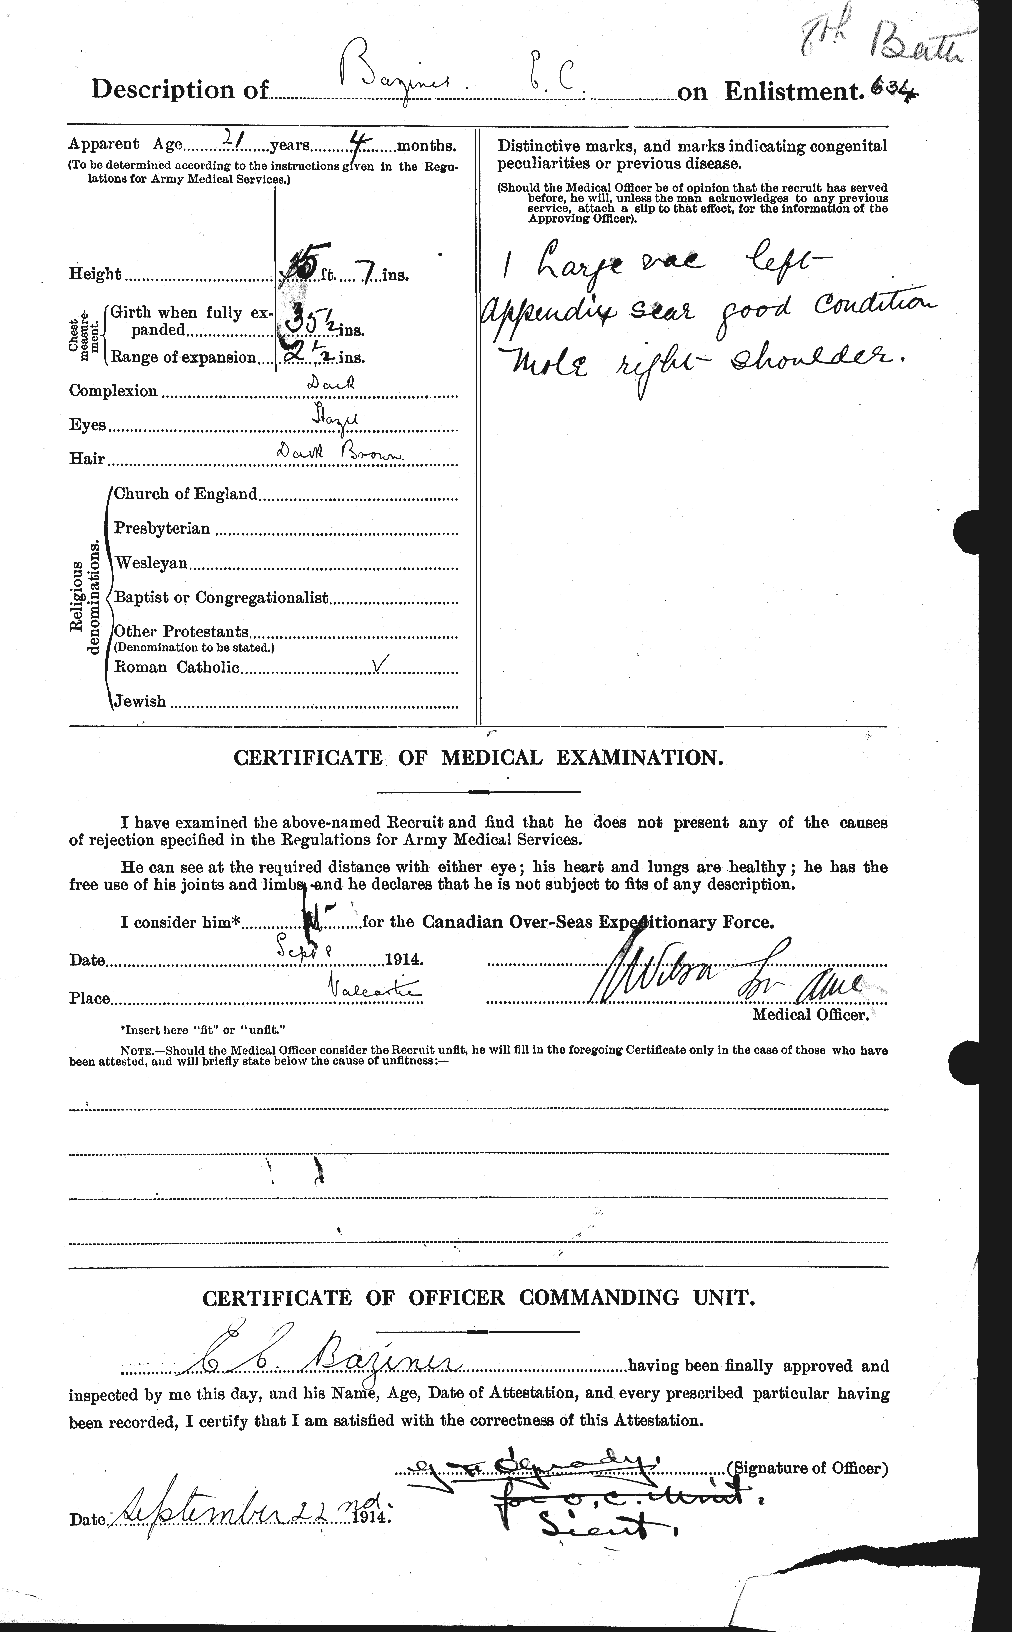 Personnel Records of the First World War - CEF 229859b